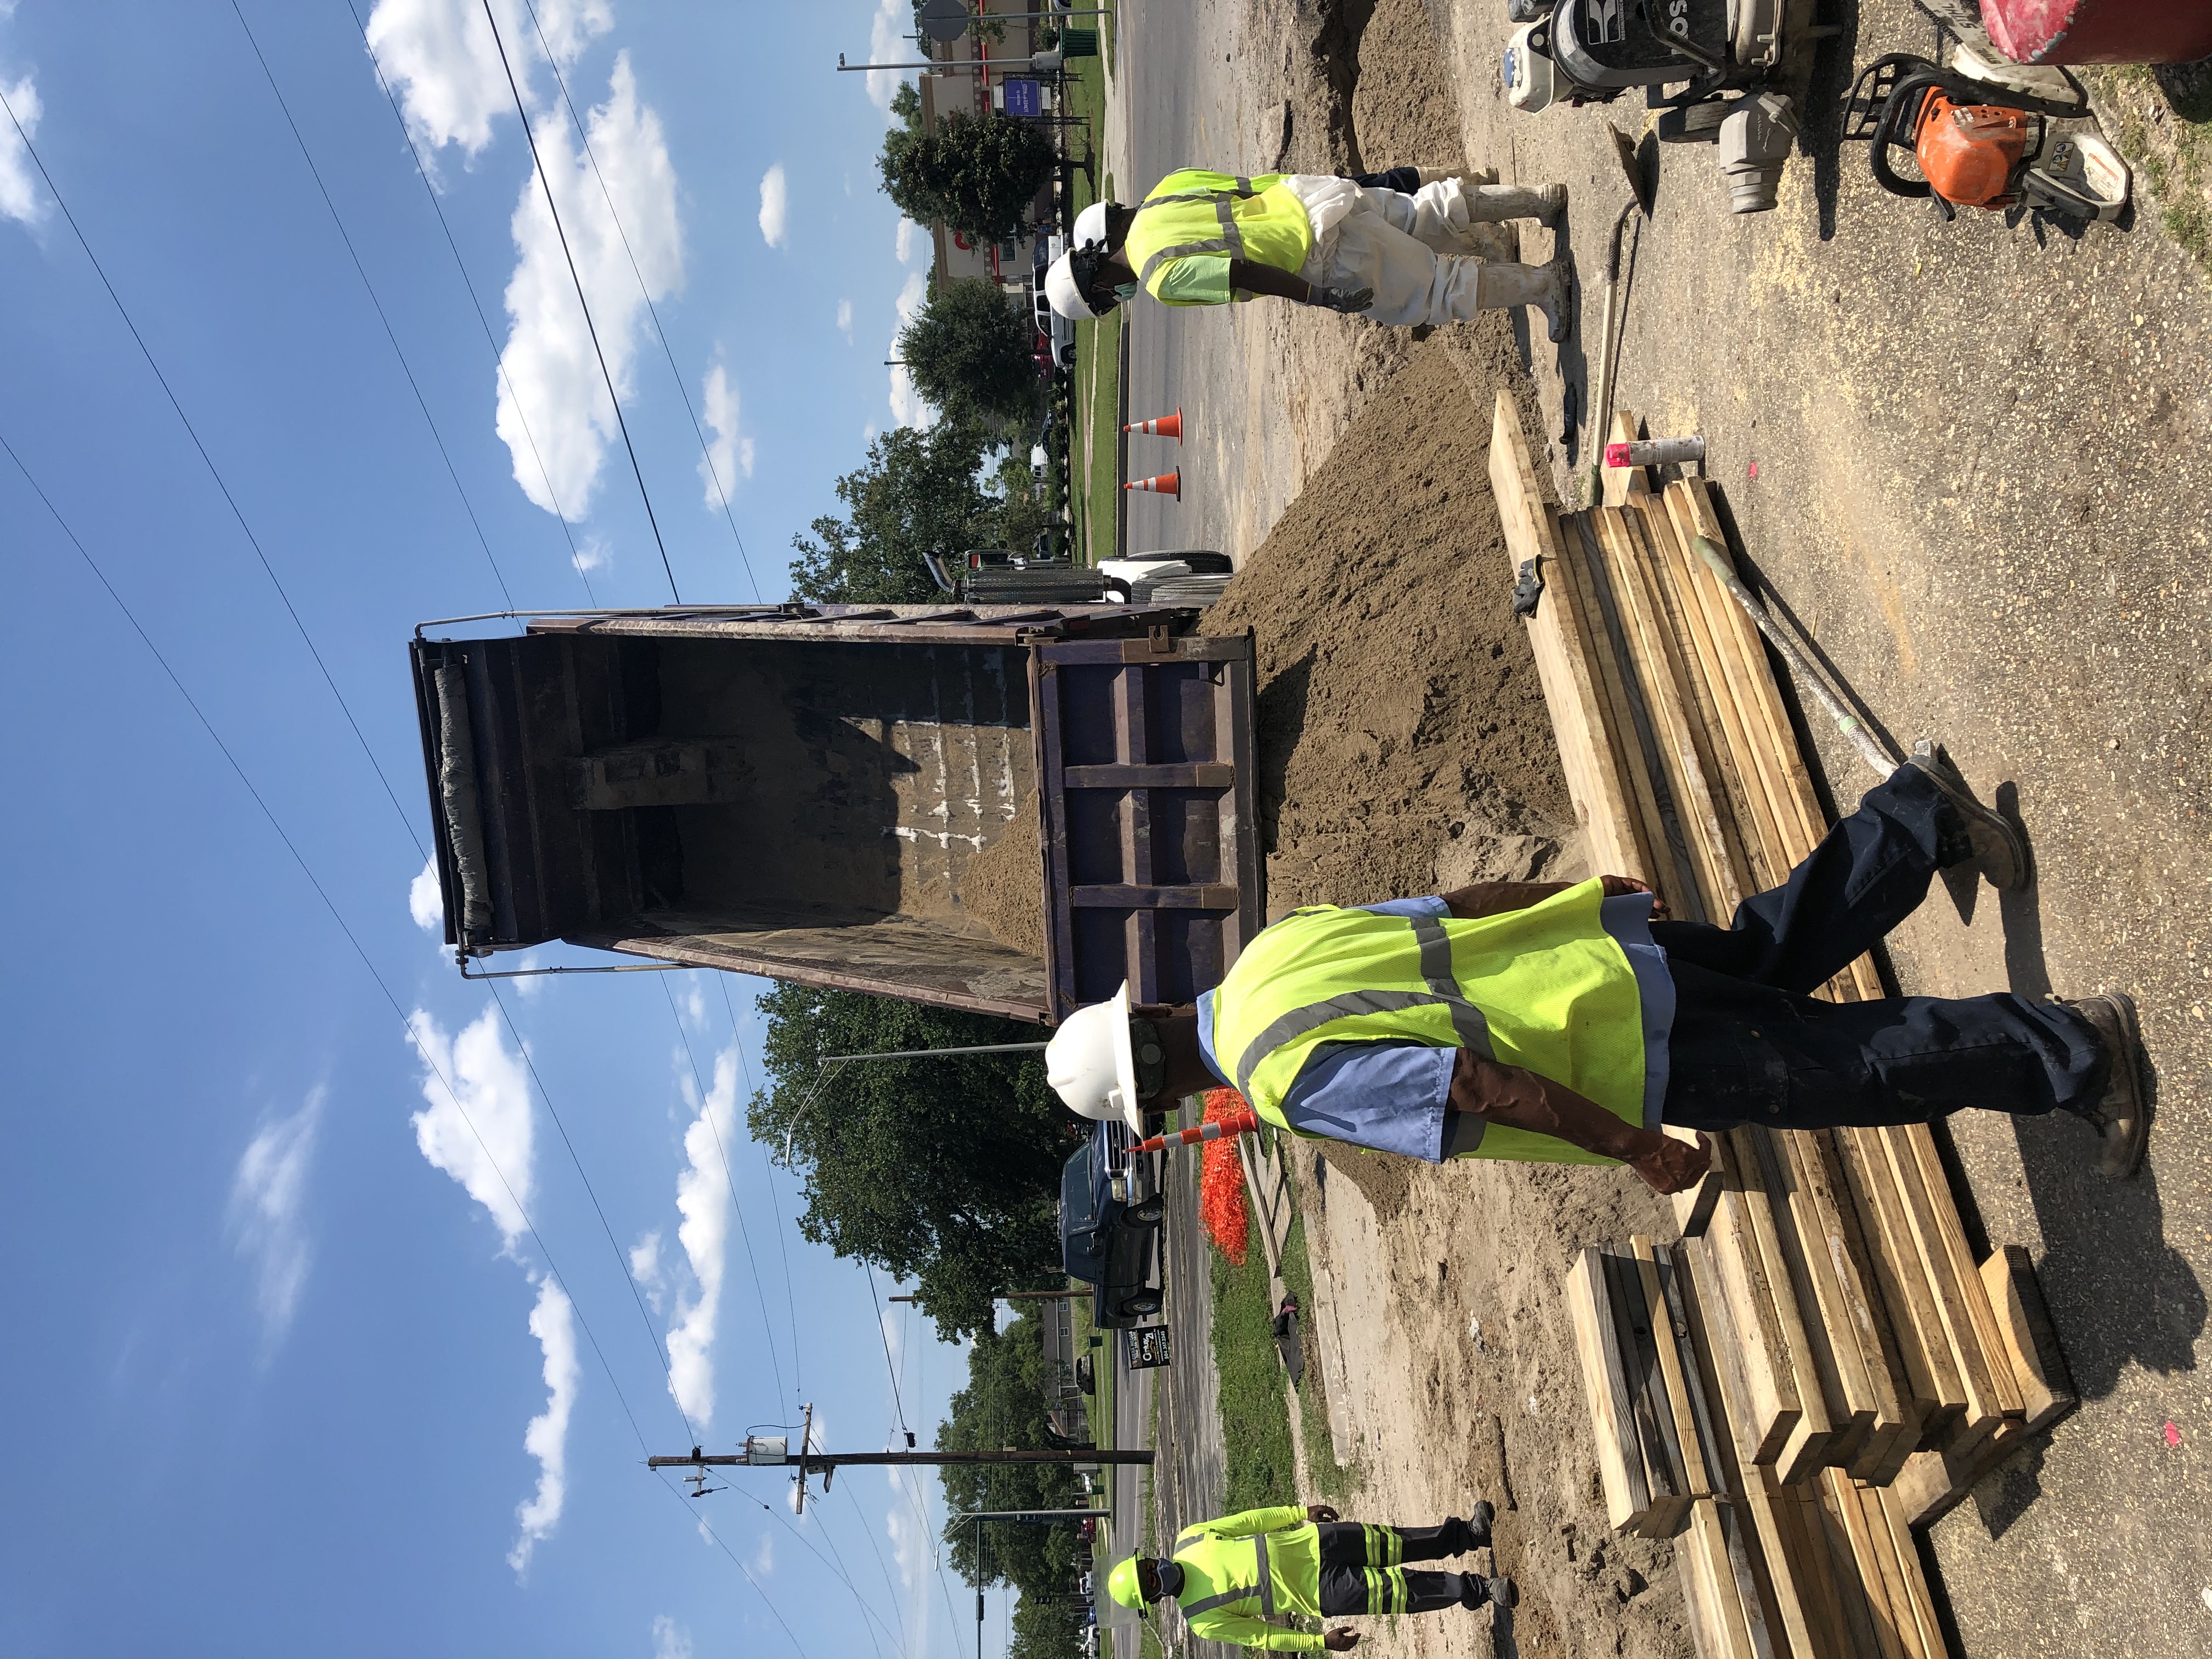 CREWS CONTINUE TO WORK WEEKENDS TO REMAIN ON SCHEDULE ON THE LOWER NINTH WARD NORTHWEST GROUP B PROJECT